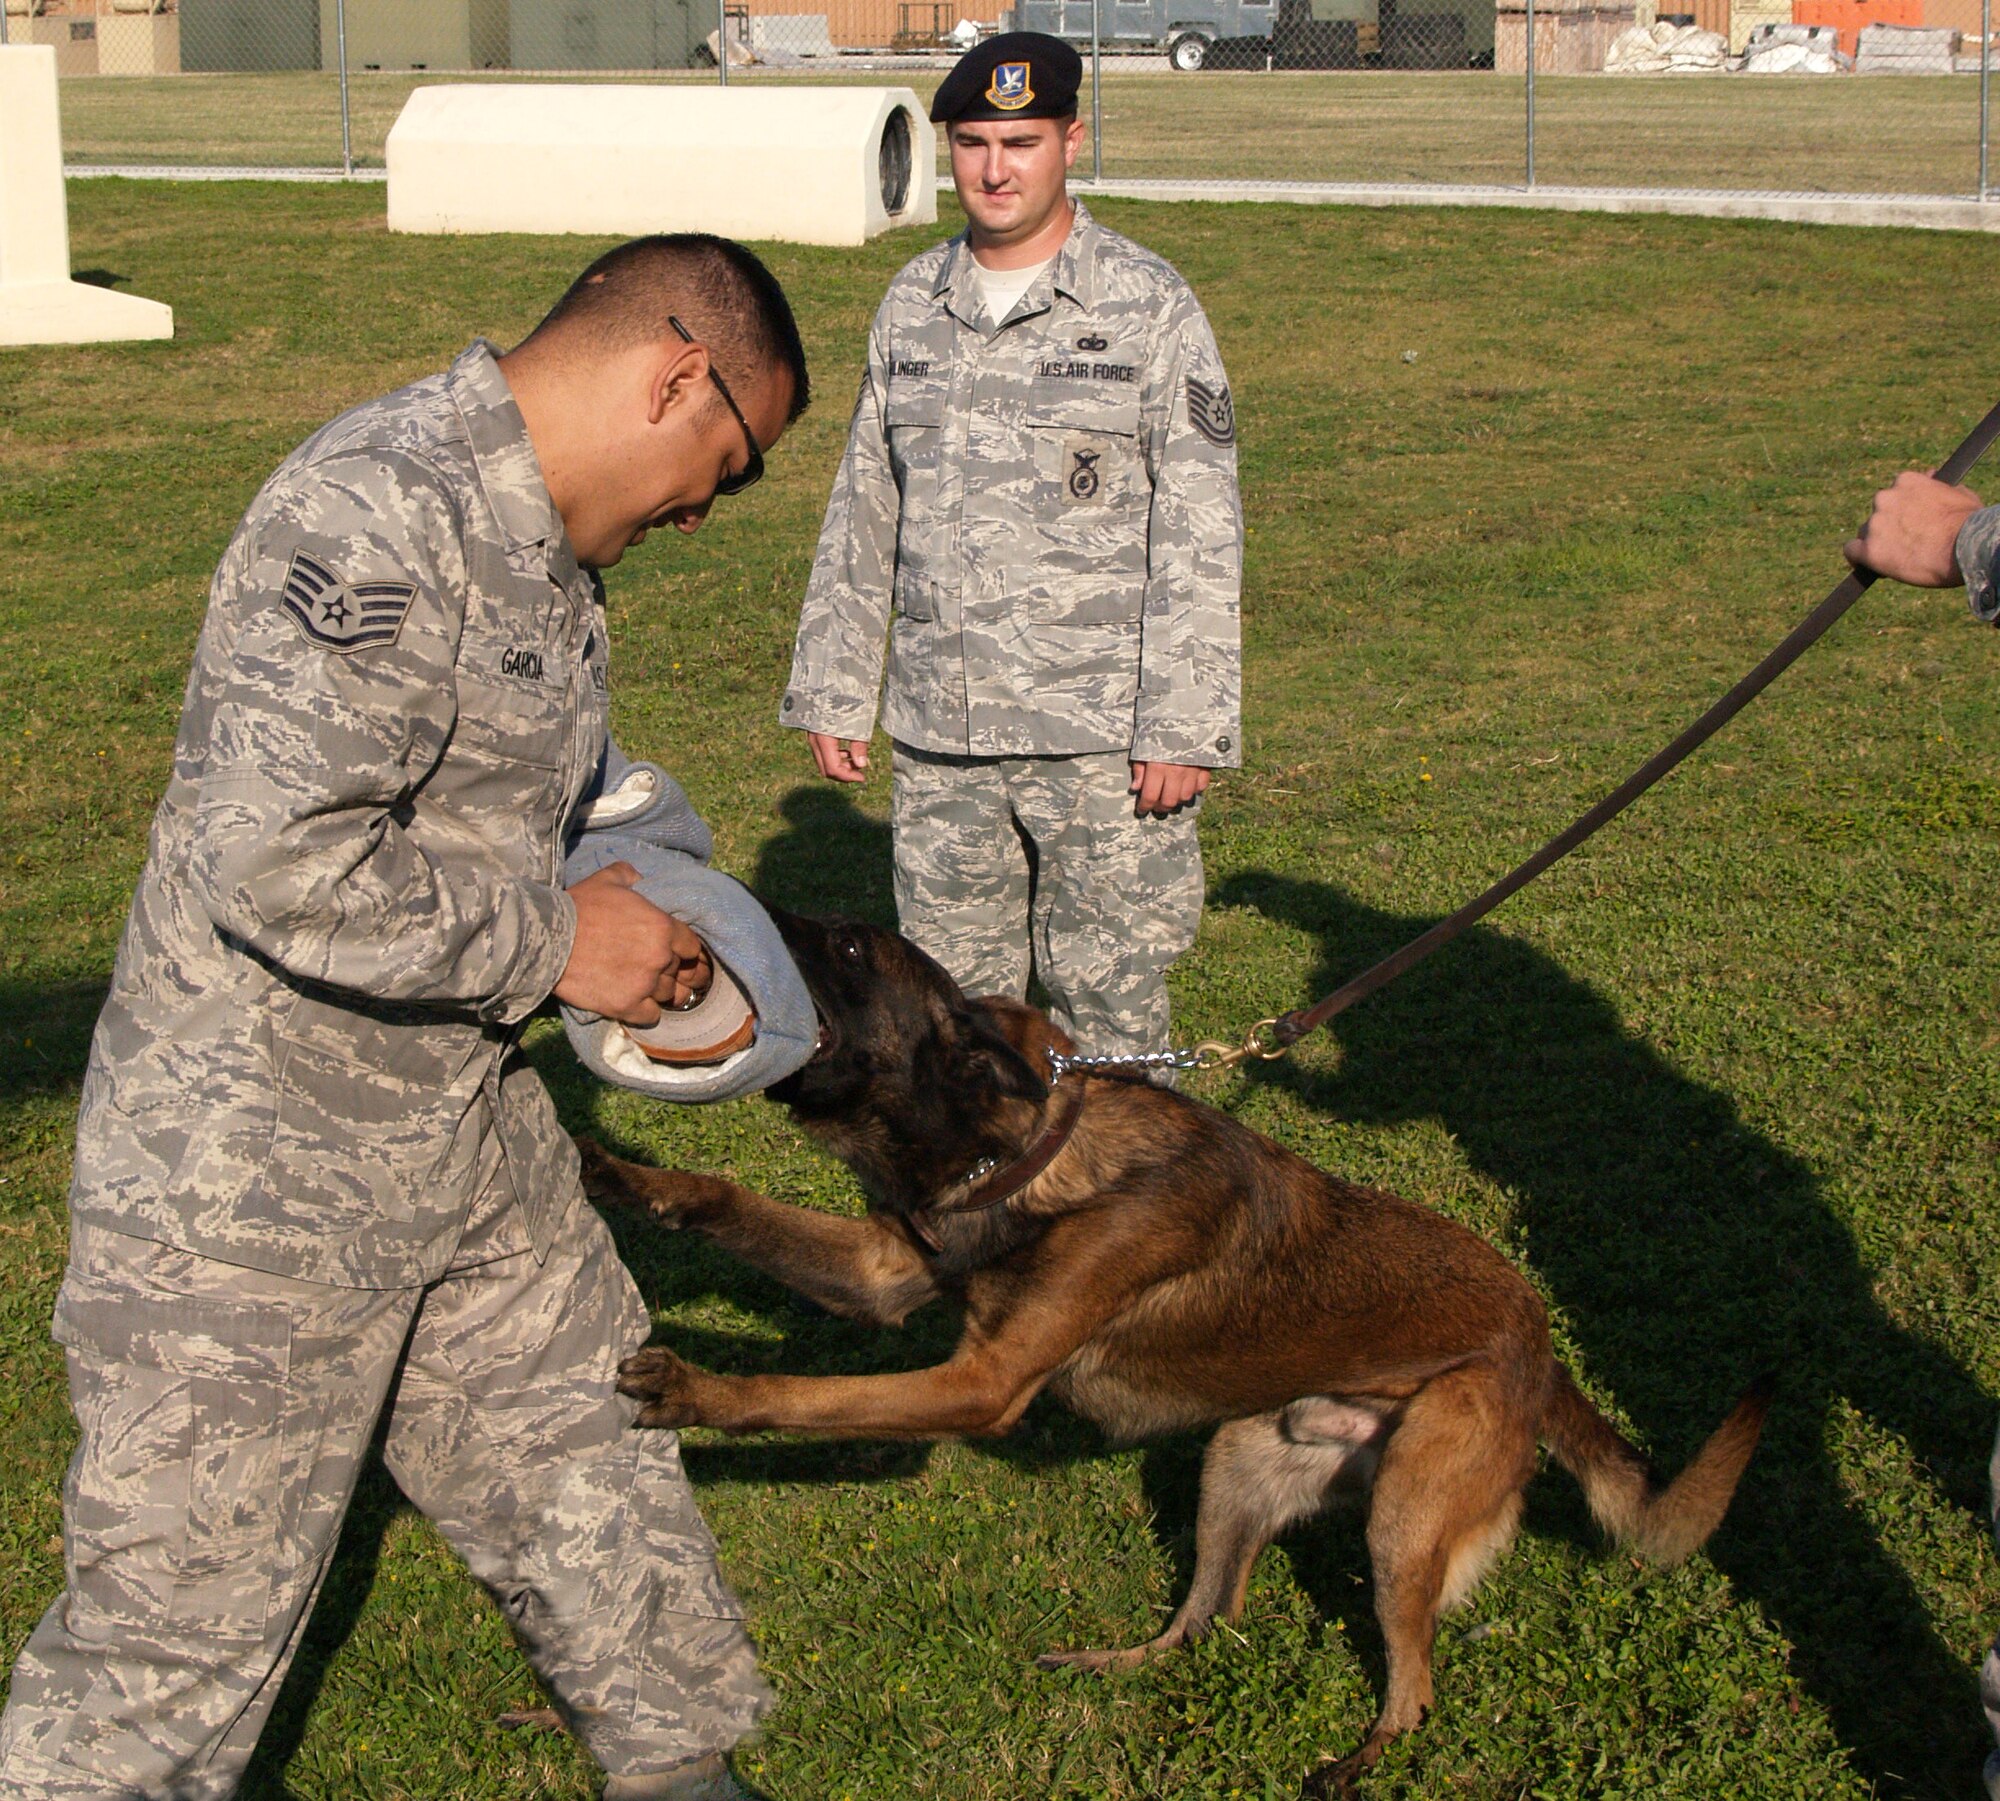 LAUGHLIN AIR FORCE BASE, Texas -- Tech. Sgt. Nicholas Ehlinger, 47th Security Forces Squadron, helps train Xxavier, 47th SFS military working dog, by teaching him to attack Staff. Sgt. Brian Garcia, 47th SFS dog handler. (photo illustration by Ron Scharven.)